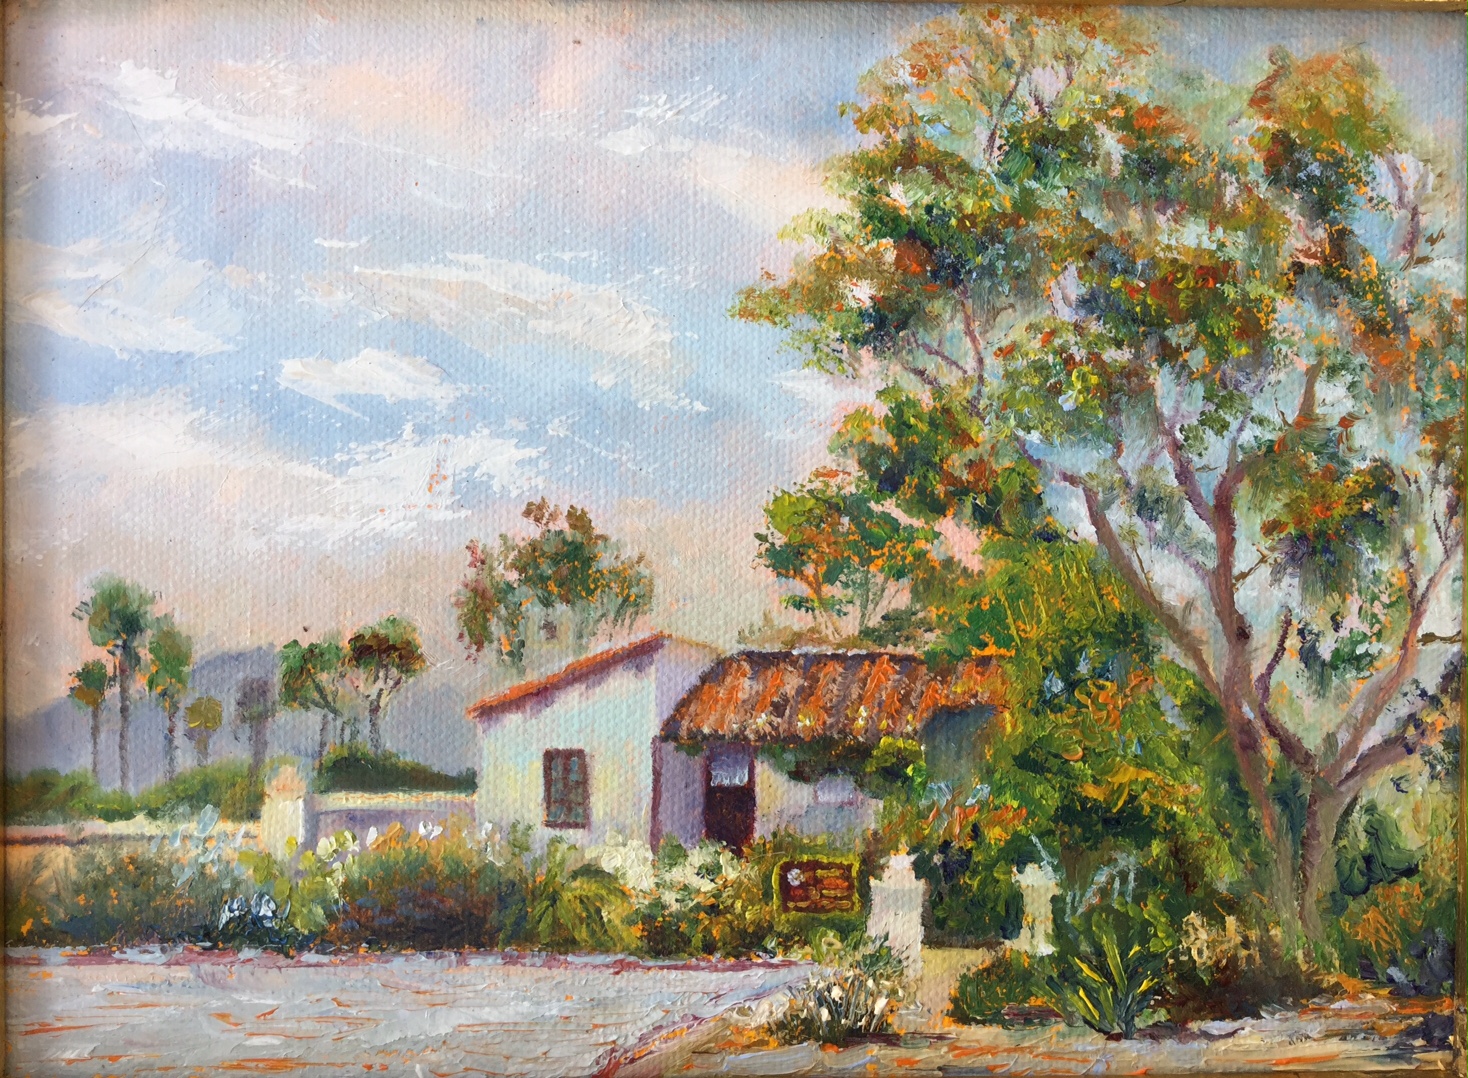 The Cottage, a plein-air painting by artist Judy Salinsky